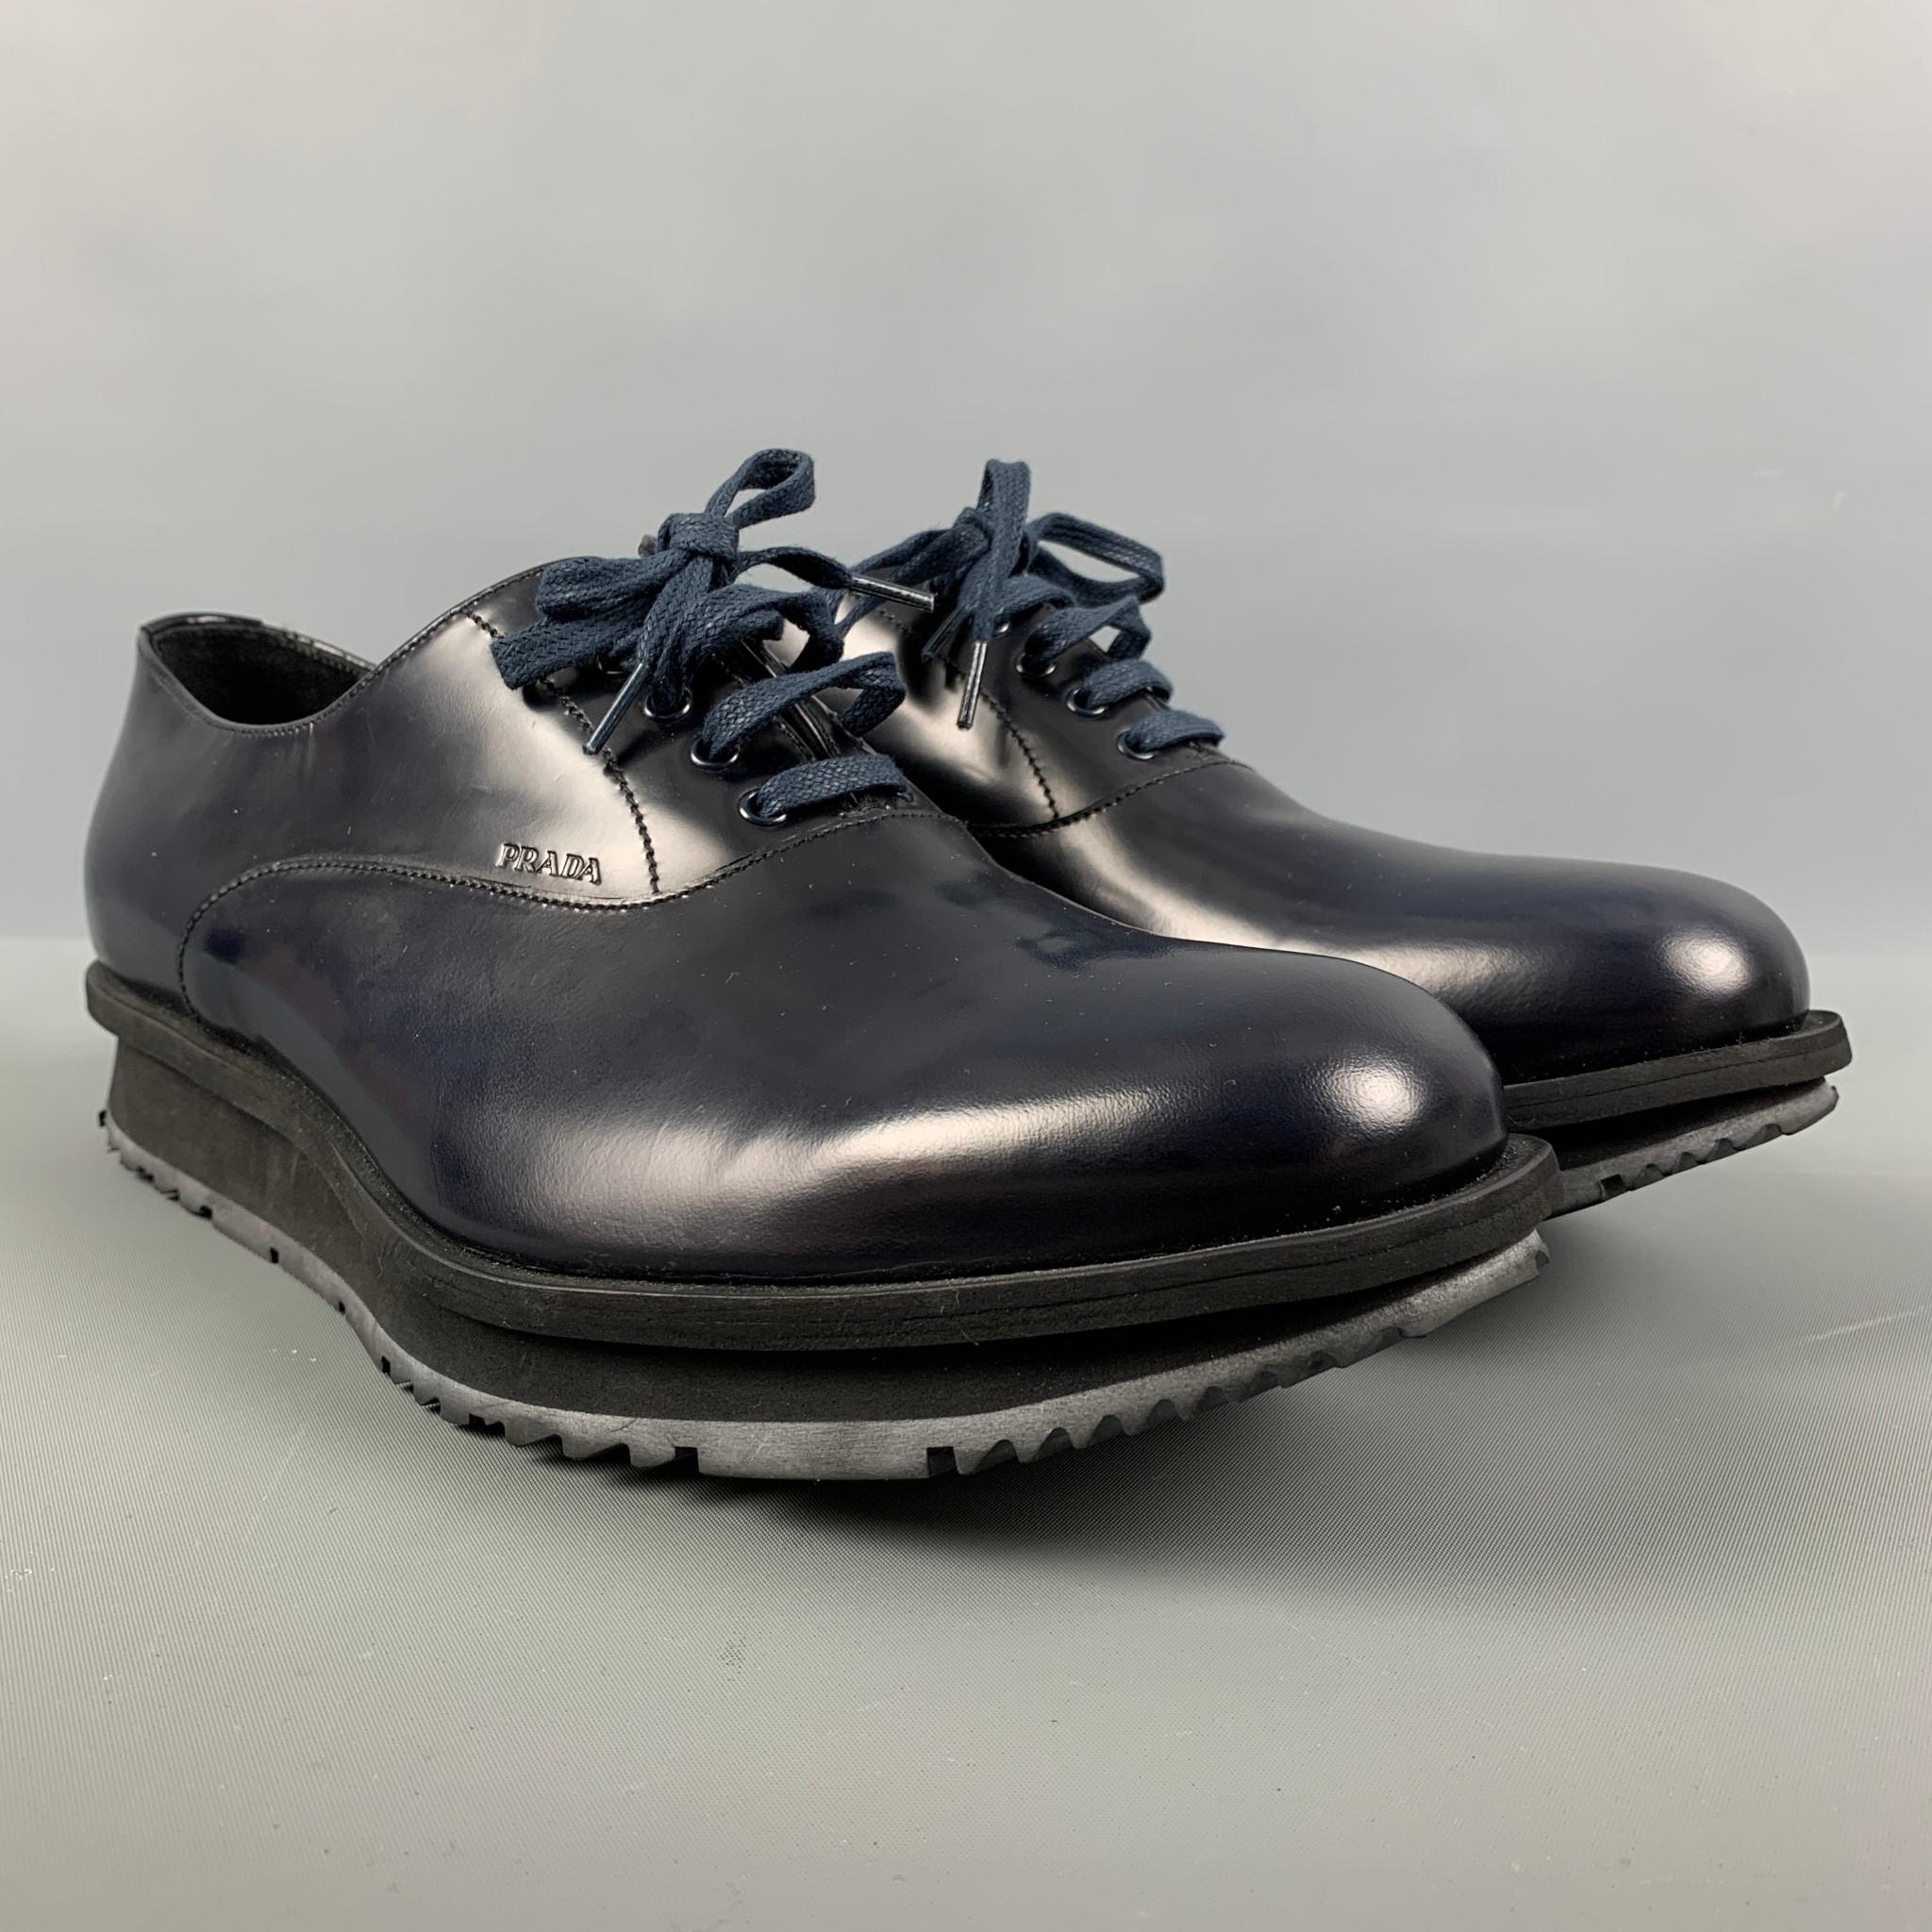 PRADA shoes comes in a navy leather featuring a round toe, rubber sole, and a lace up closure. Made in Italy.

Excellent Pre-Owned Condition.
Marked: 1 2EE 093 7B

Outsole: 12.5 in. x 4 in. 

SKU: 124531
Category: Lace Up Shoes

More Details
Brand: